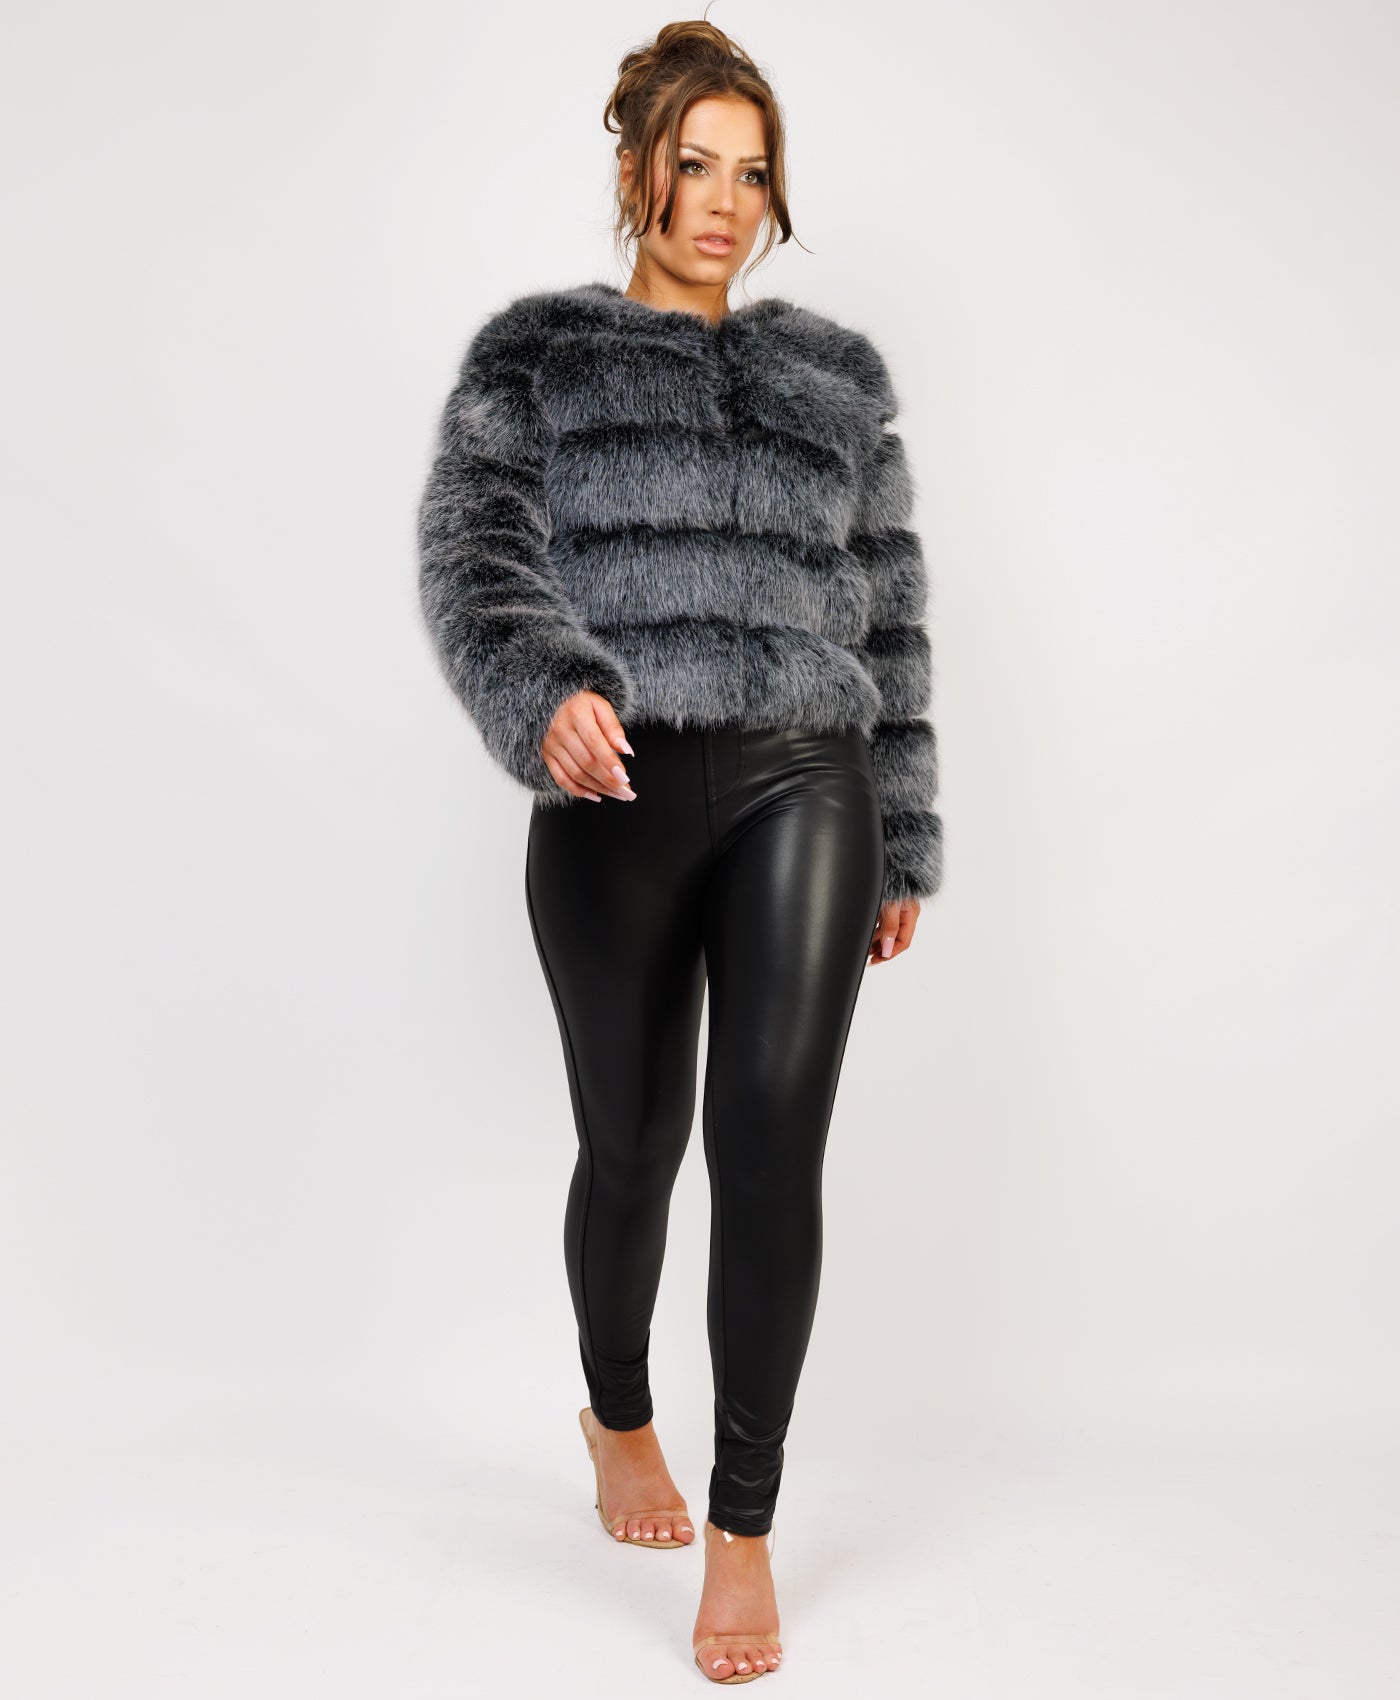 Frosted-Black-Premium-Faux-Fur-Tiered-Jacket-Coat-5